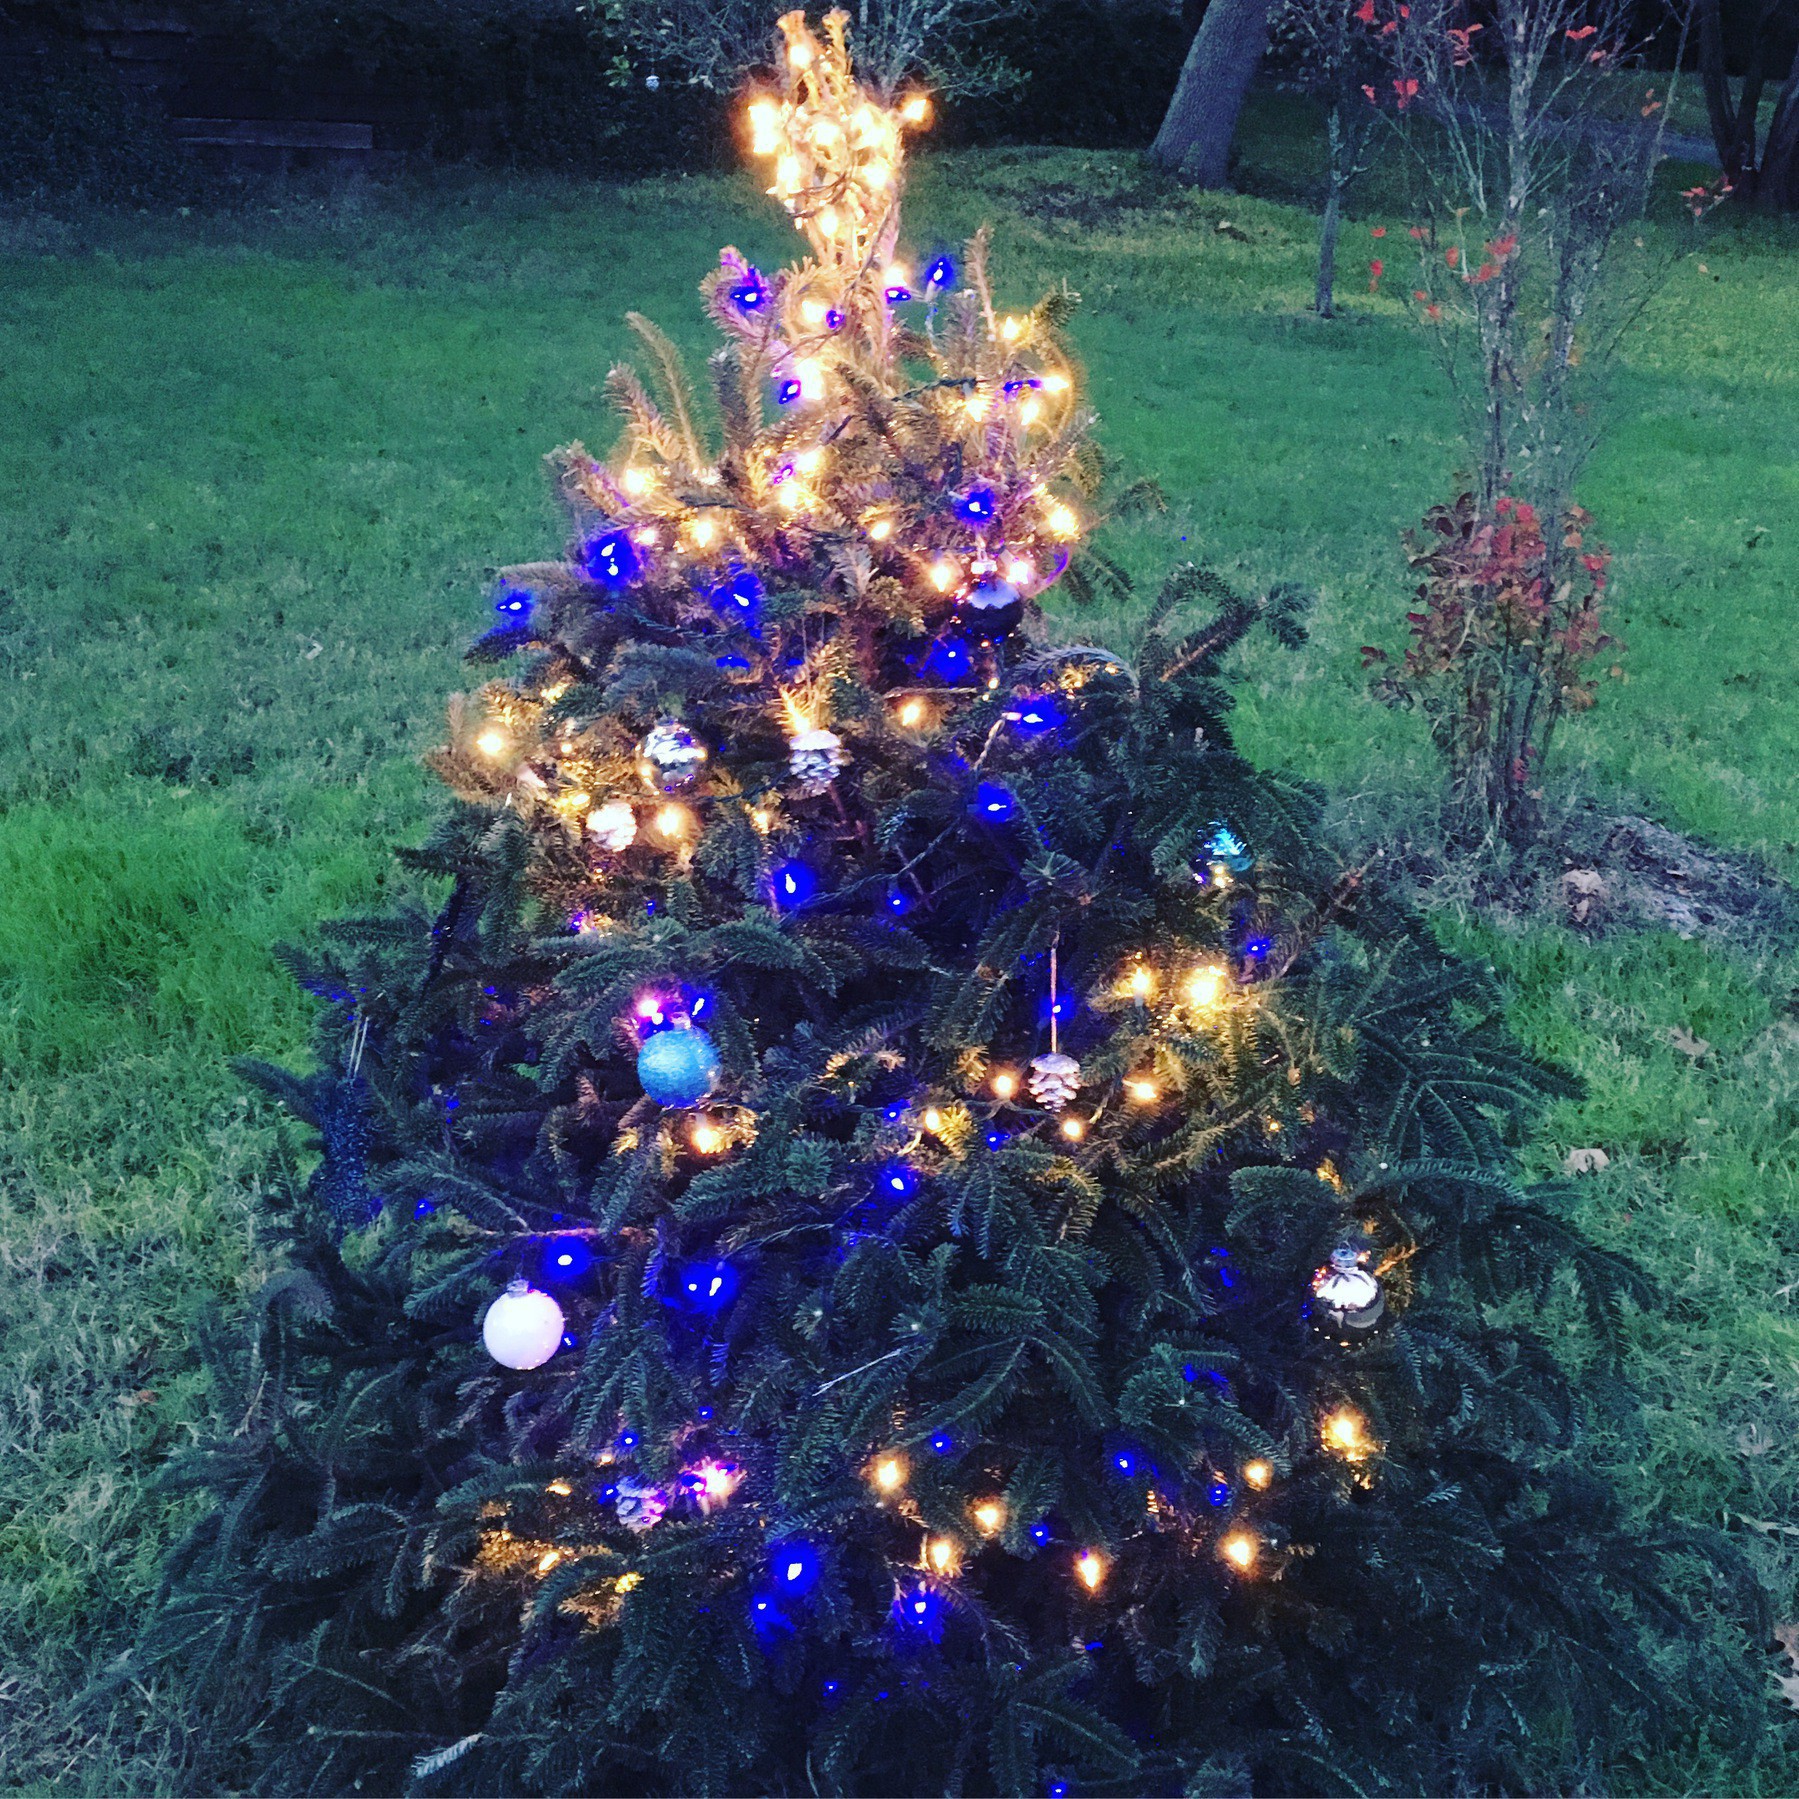 Blue lights for the outside tree